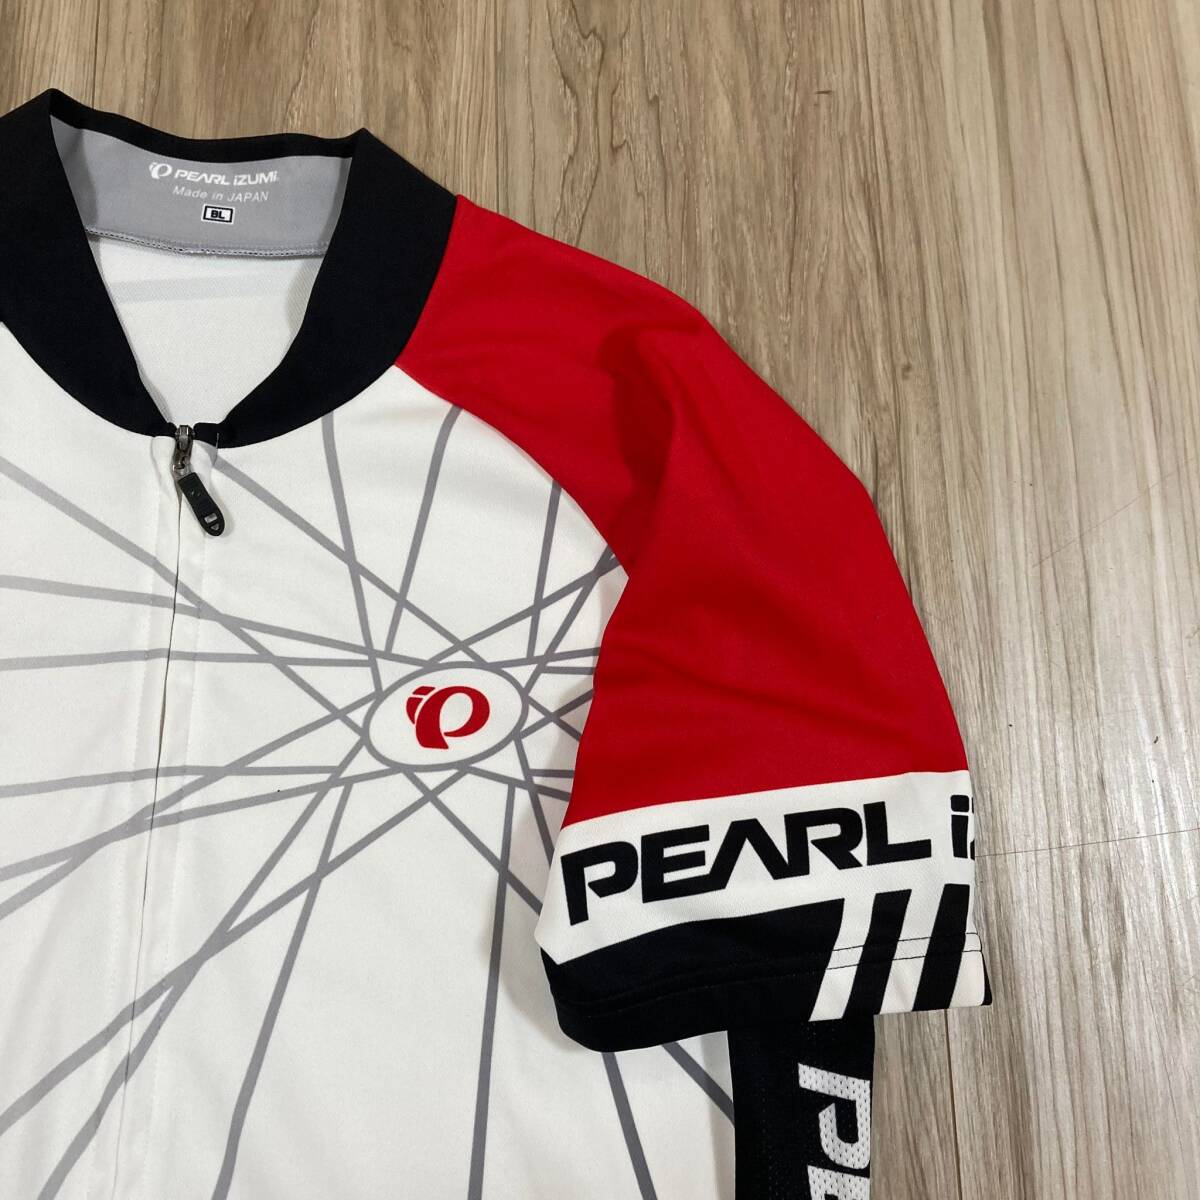  free shipping * pearl izmiBL ( wide width L) men's short sleeves cycle jersey made in Japan PEARL IZUMI both side mesh series good quality goods n22 white × red × black 